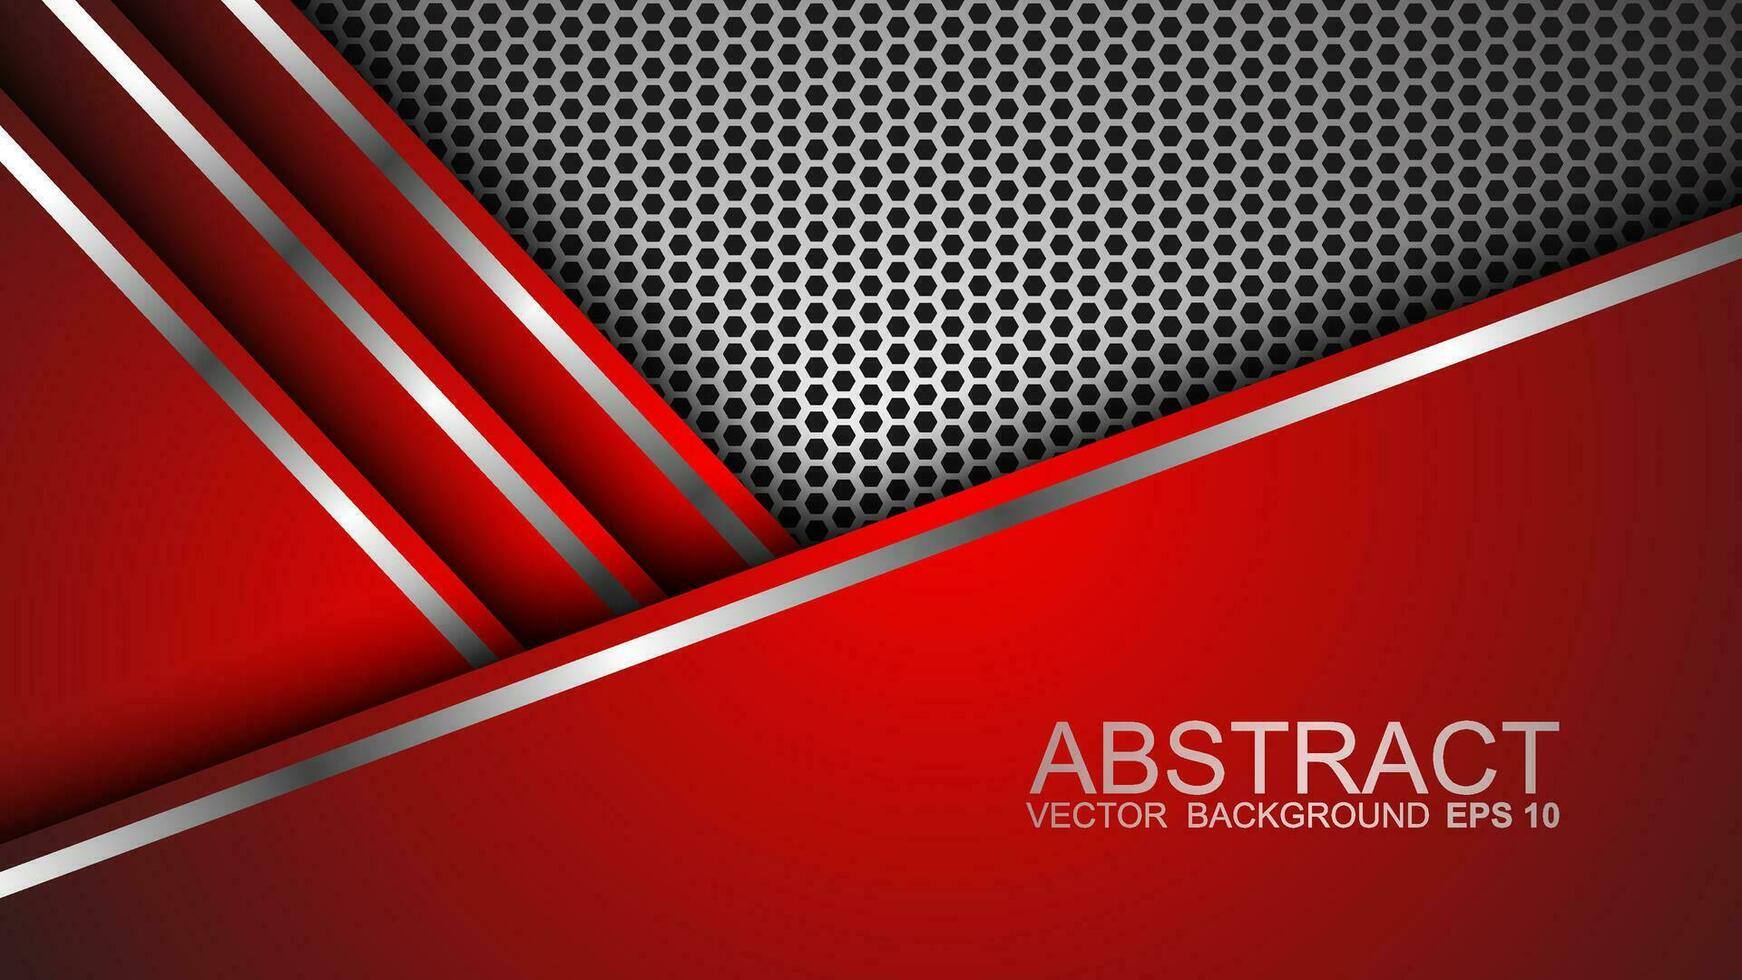 Abstract red and white overlapping layers background combined with silver textured lines decoration. Luxury and premium concept vector design template for using modern cover elements, banners, cards